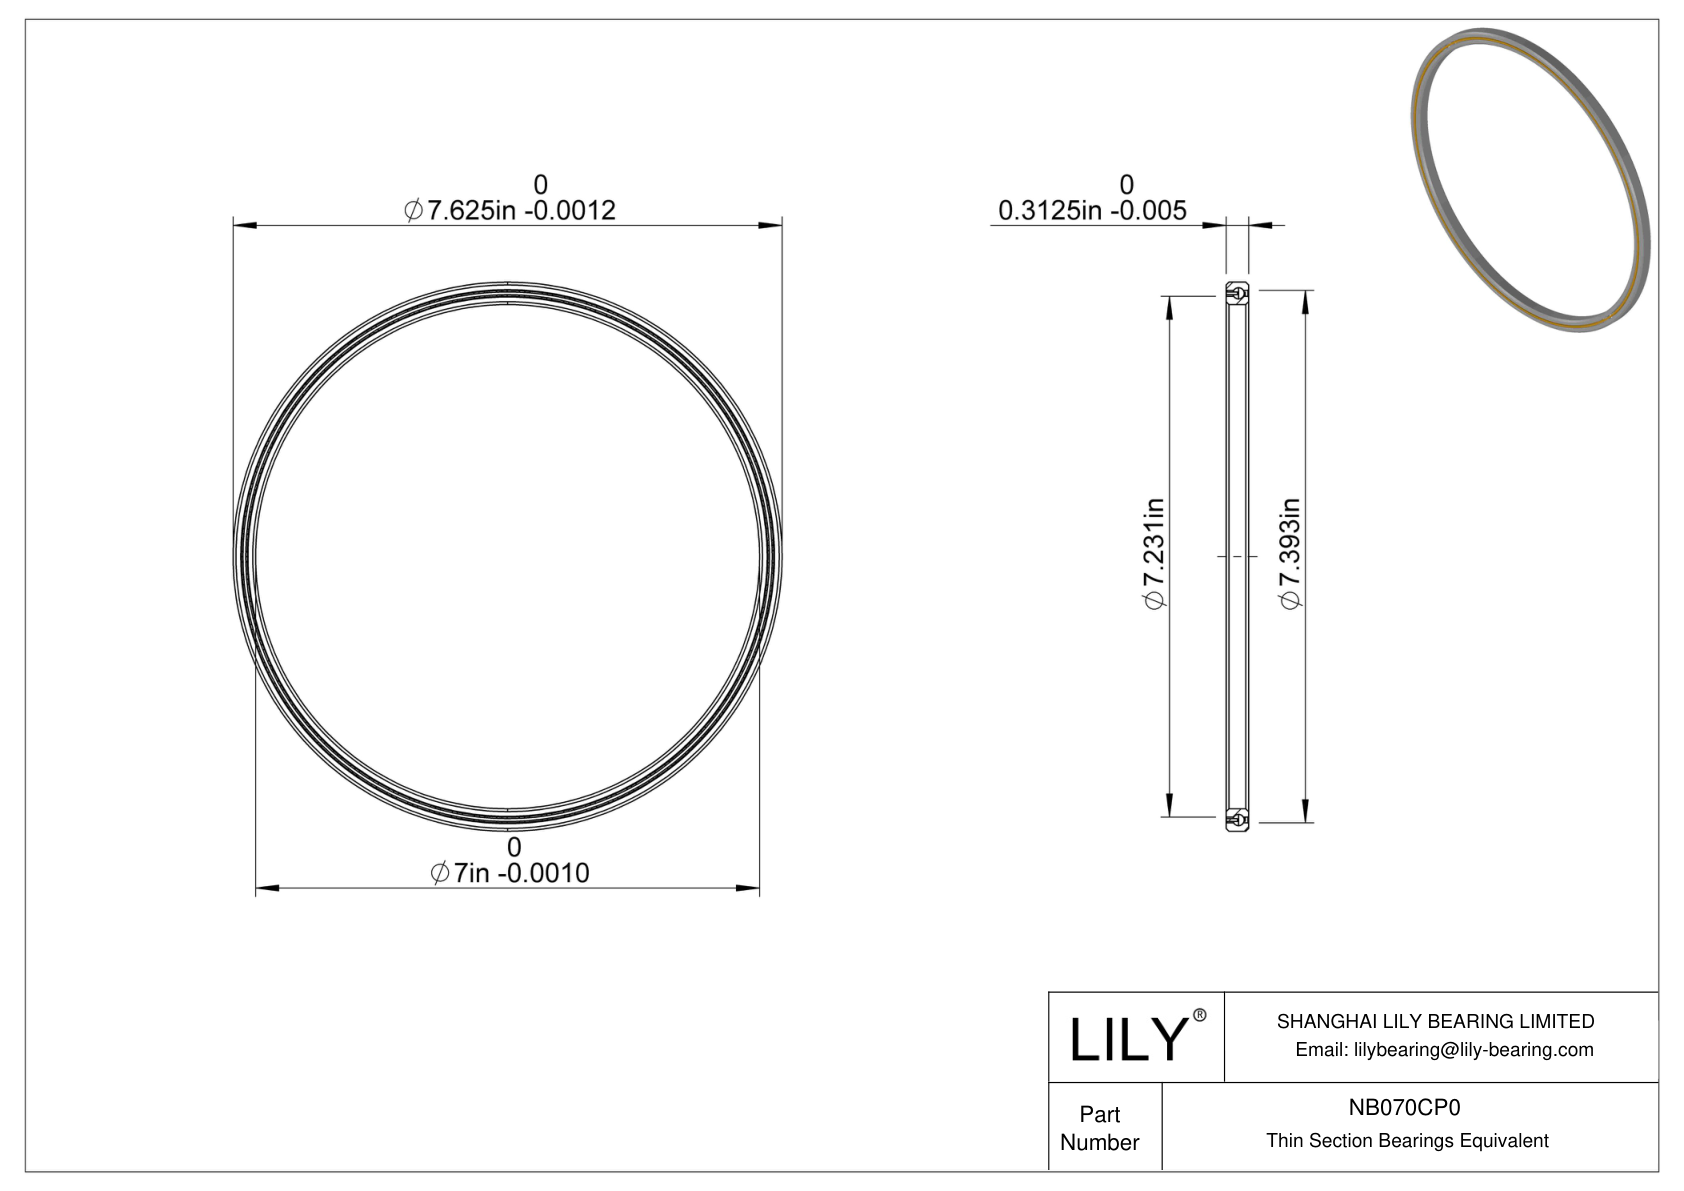 NB070CP0 Constant Section (CS) Bearings cad drawing